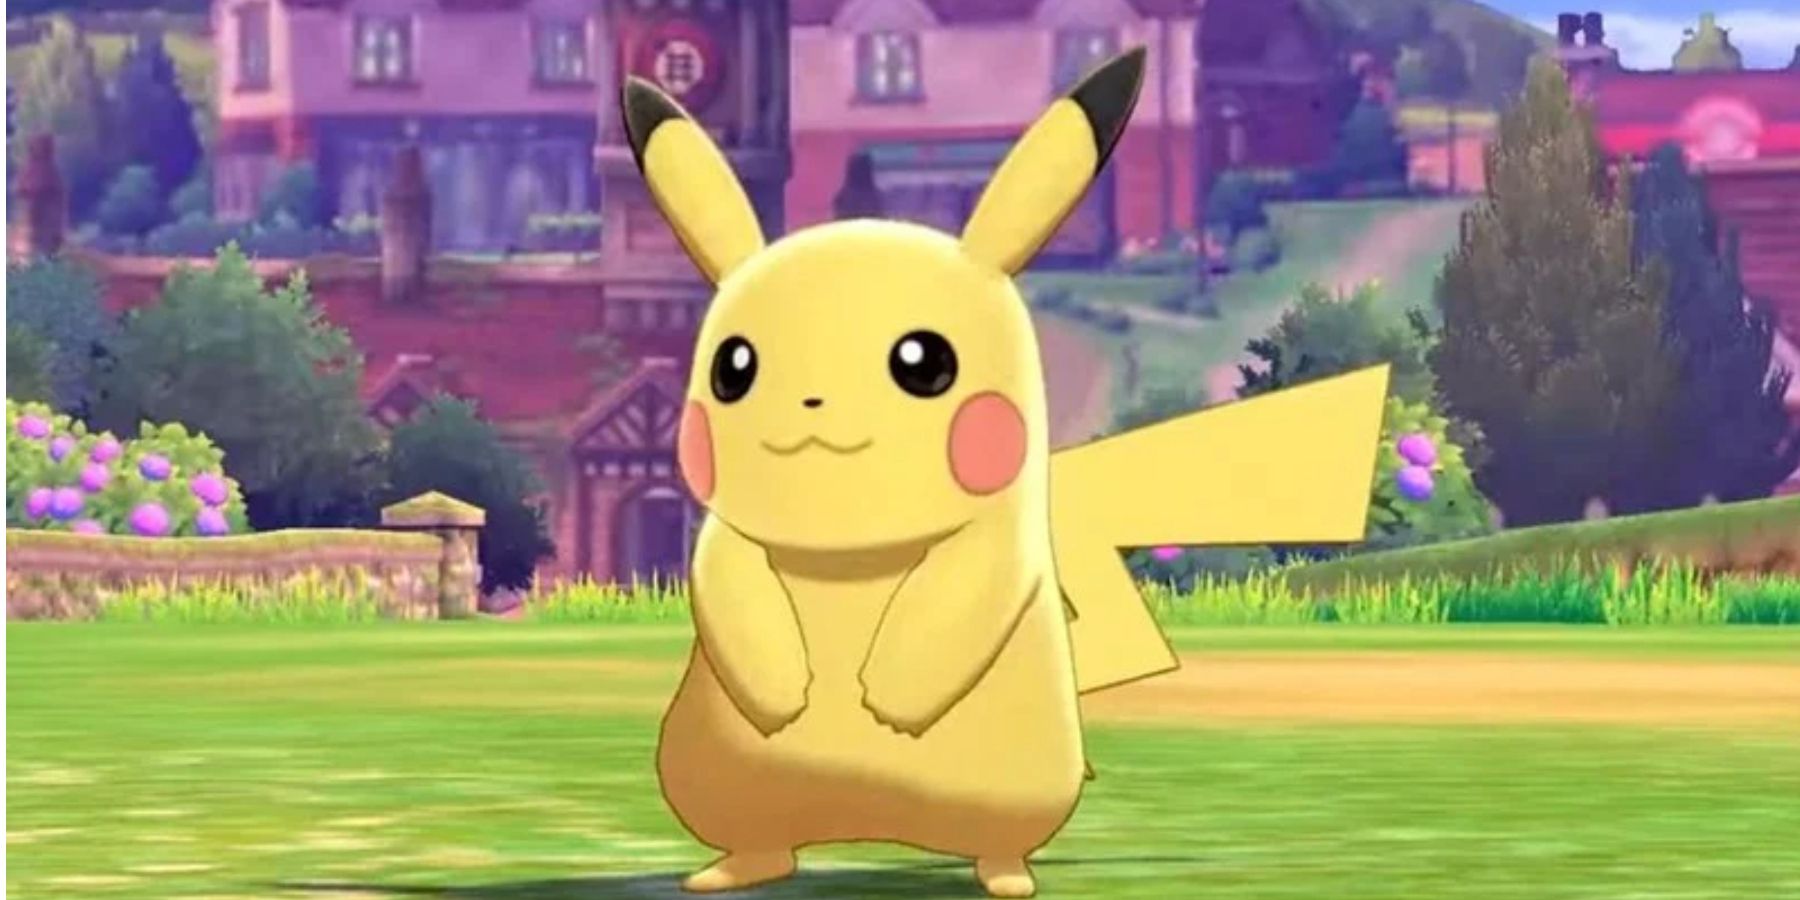 Pikachu in Sword and Shield.